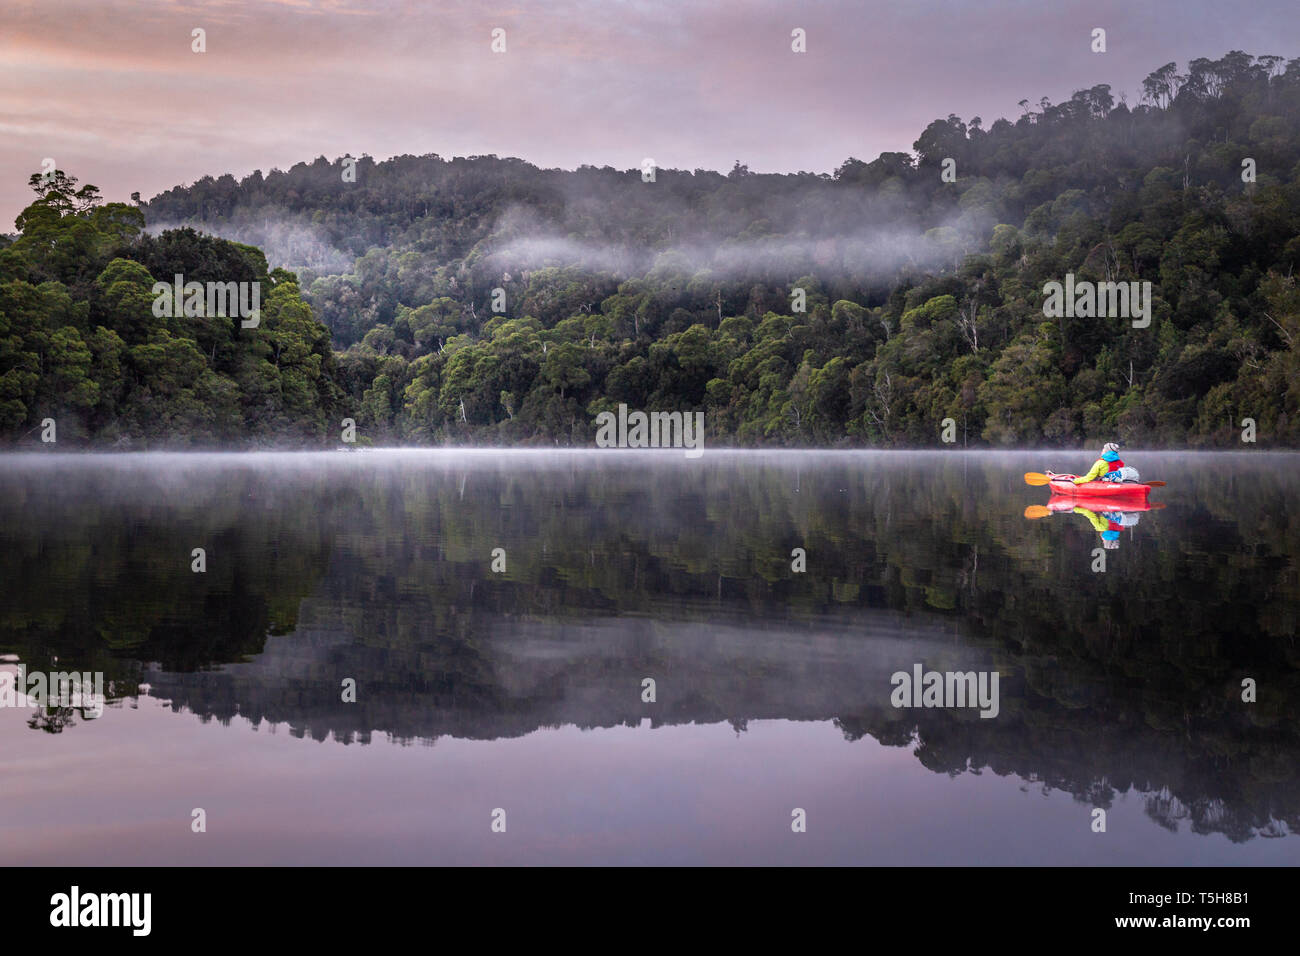 Single kayaker paddling down a still river at sunrise, through mountains and rainforest with beautiful reflections in the water Stock Photo